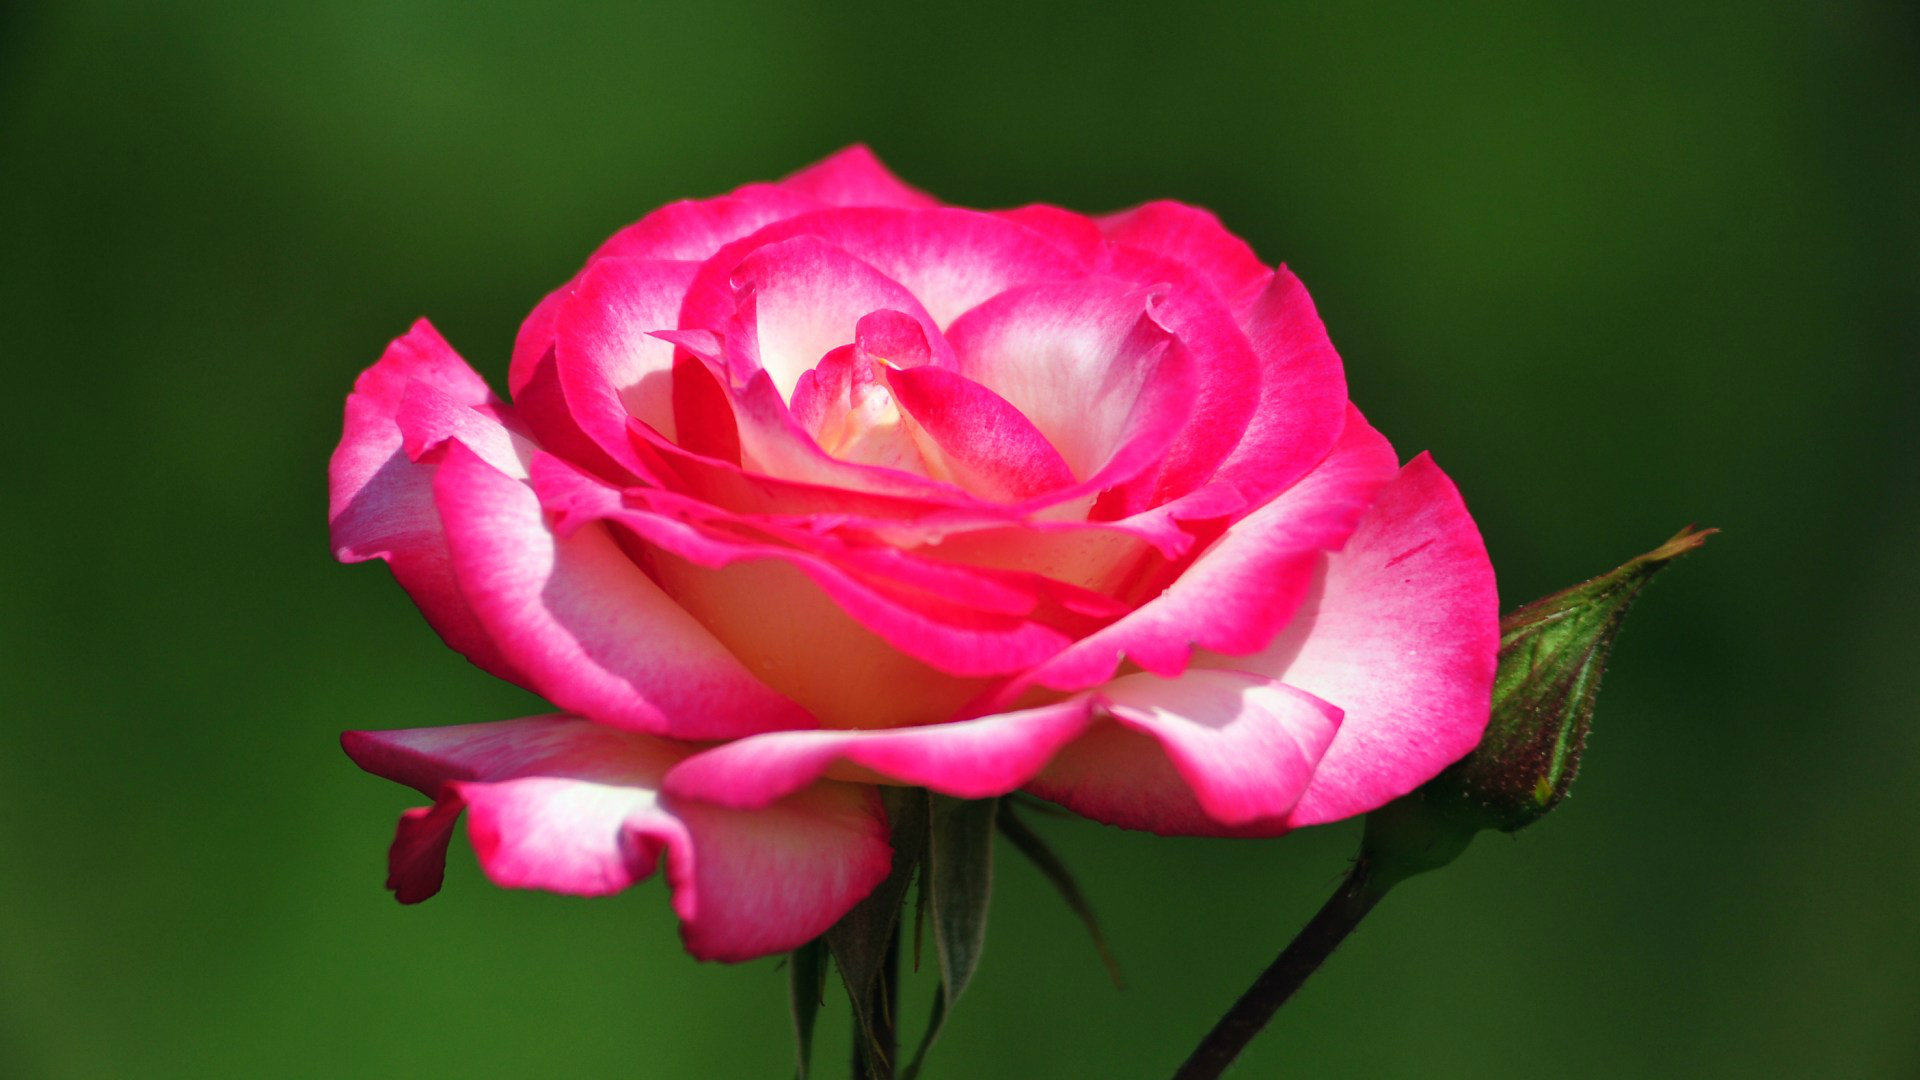 Awesome Beautiful Pink Rose Flower Images Full Hd Pics Widescreen ...